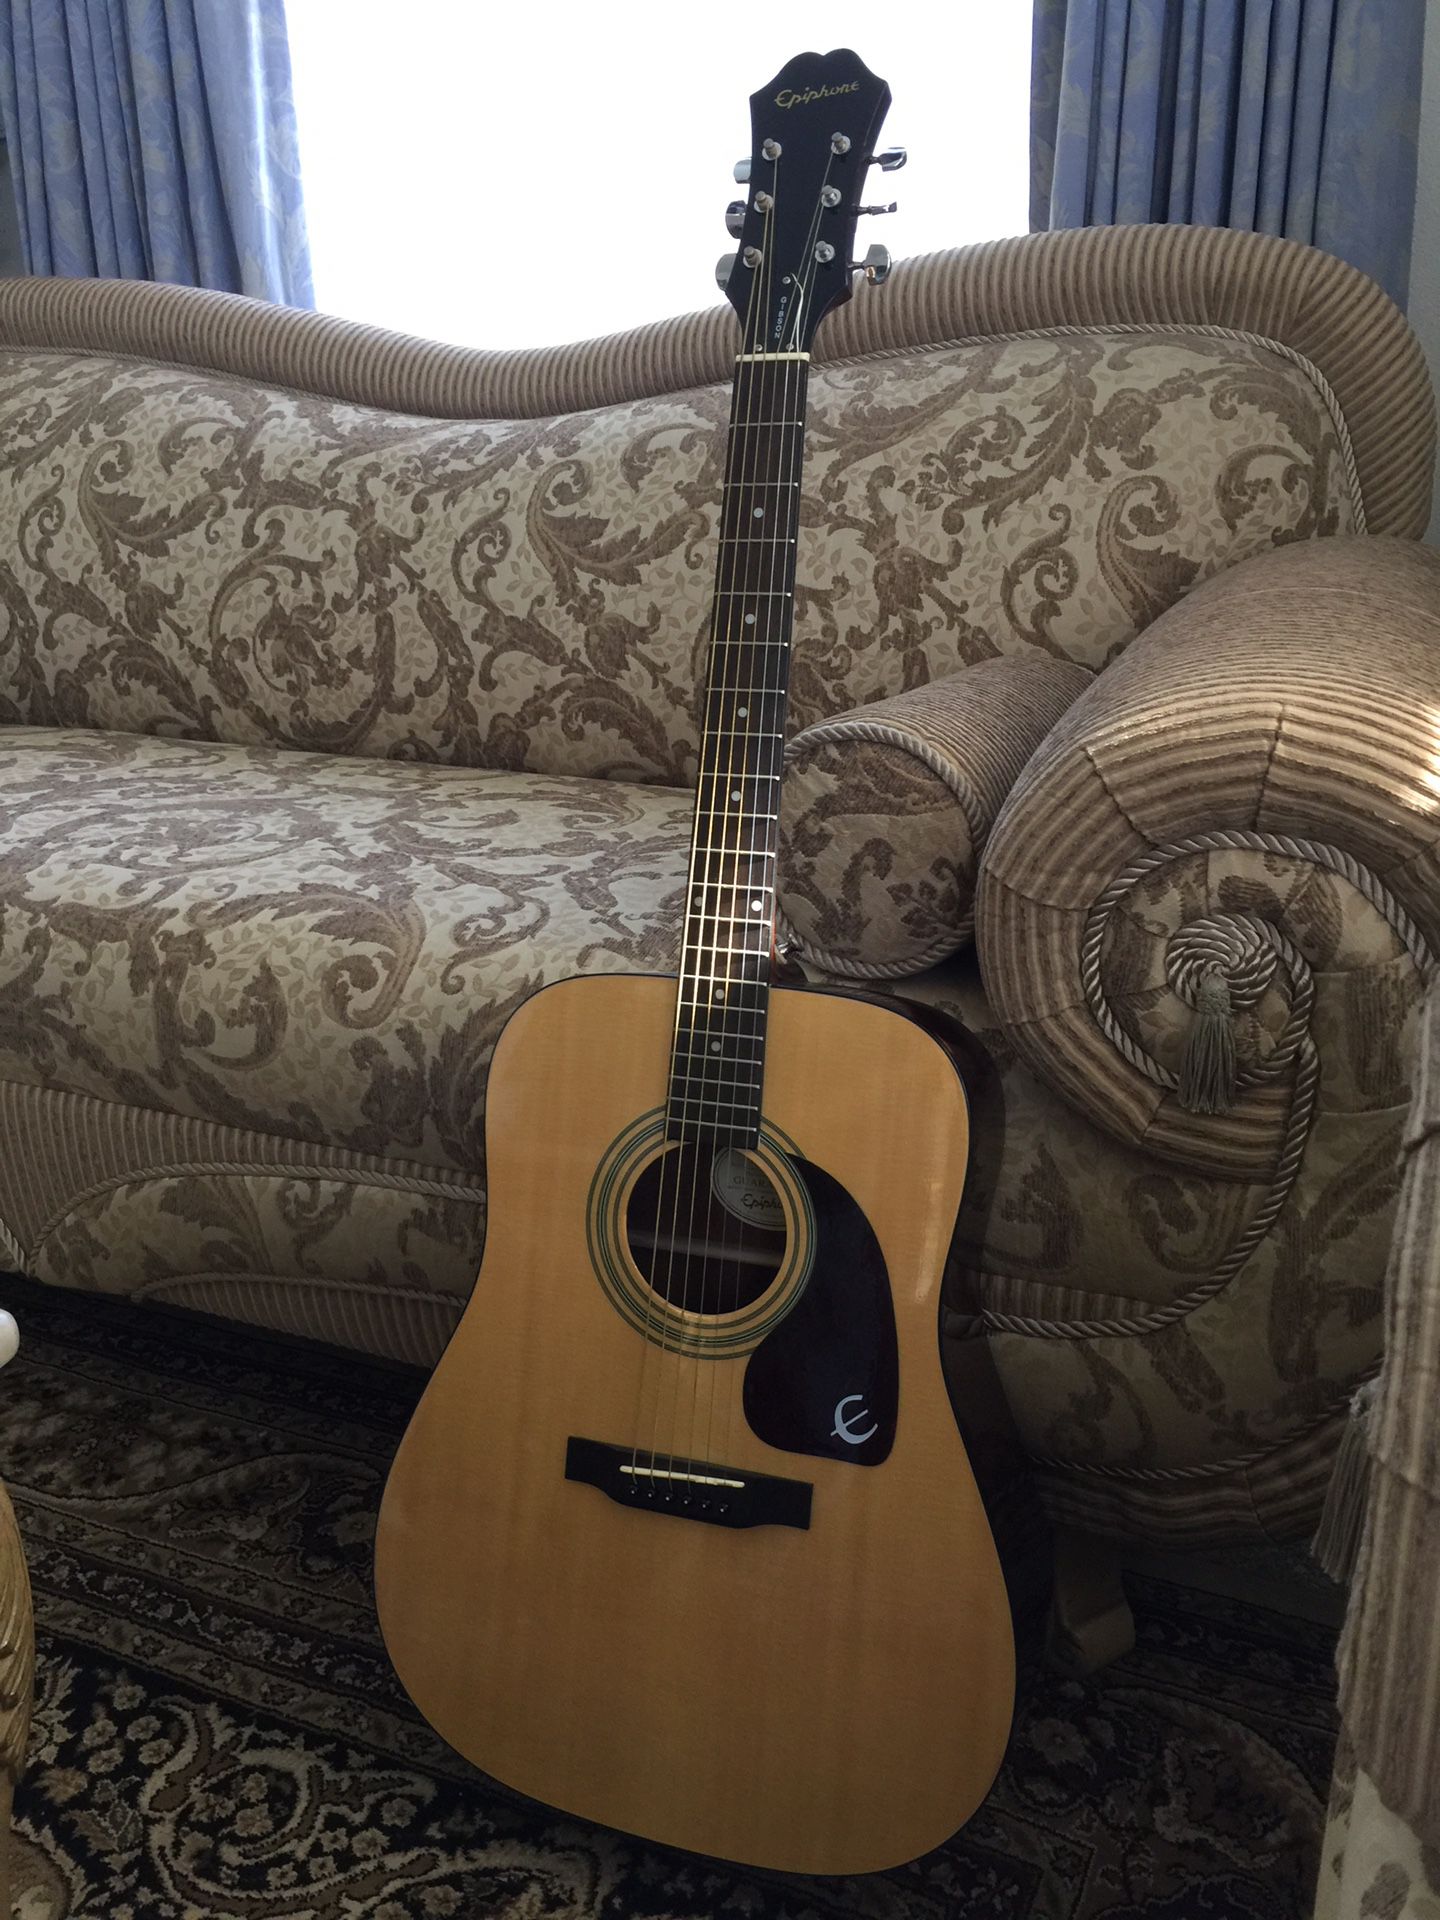 Epiphone (Gibson) Acoustic Guitar, Model: PR-150NA, Serial Number: EA03115639 || Dreadnought style • Spruce top • Mahogany back and sides • Mahogany